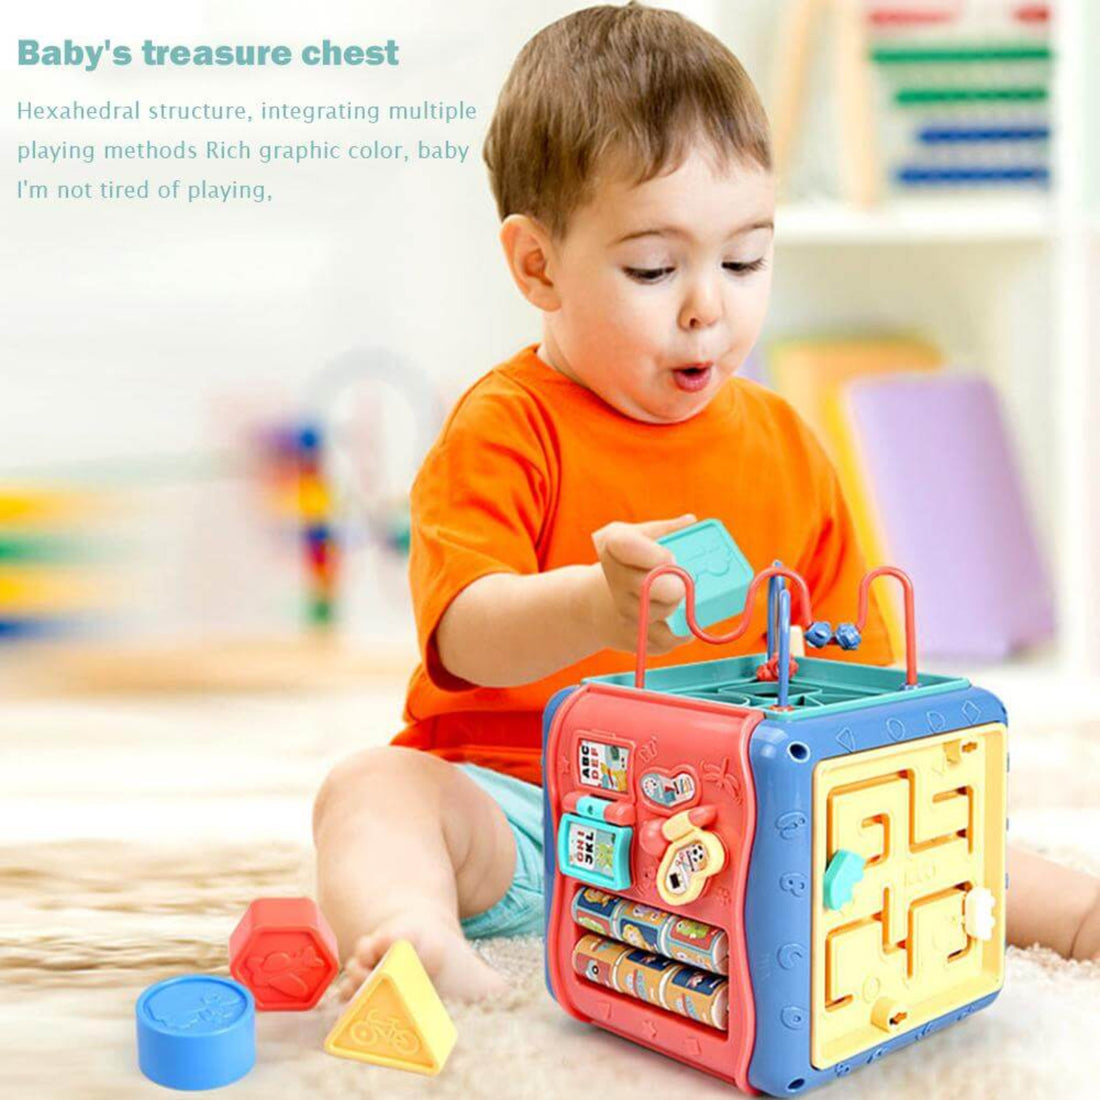 Baby hexahedron educational toy set